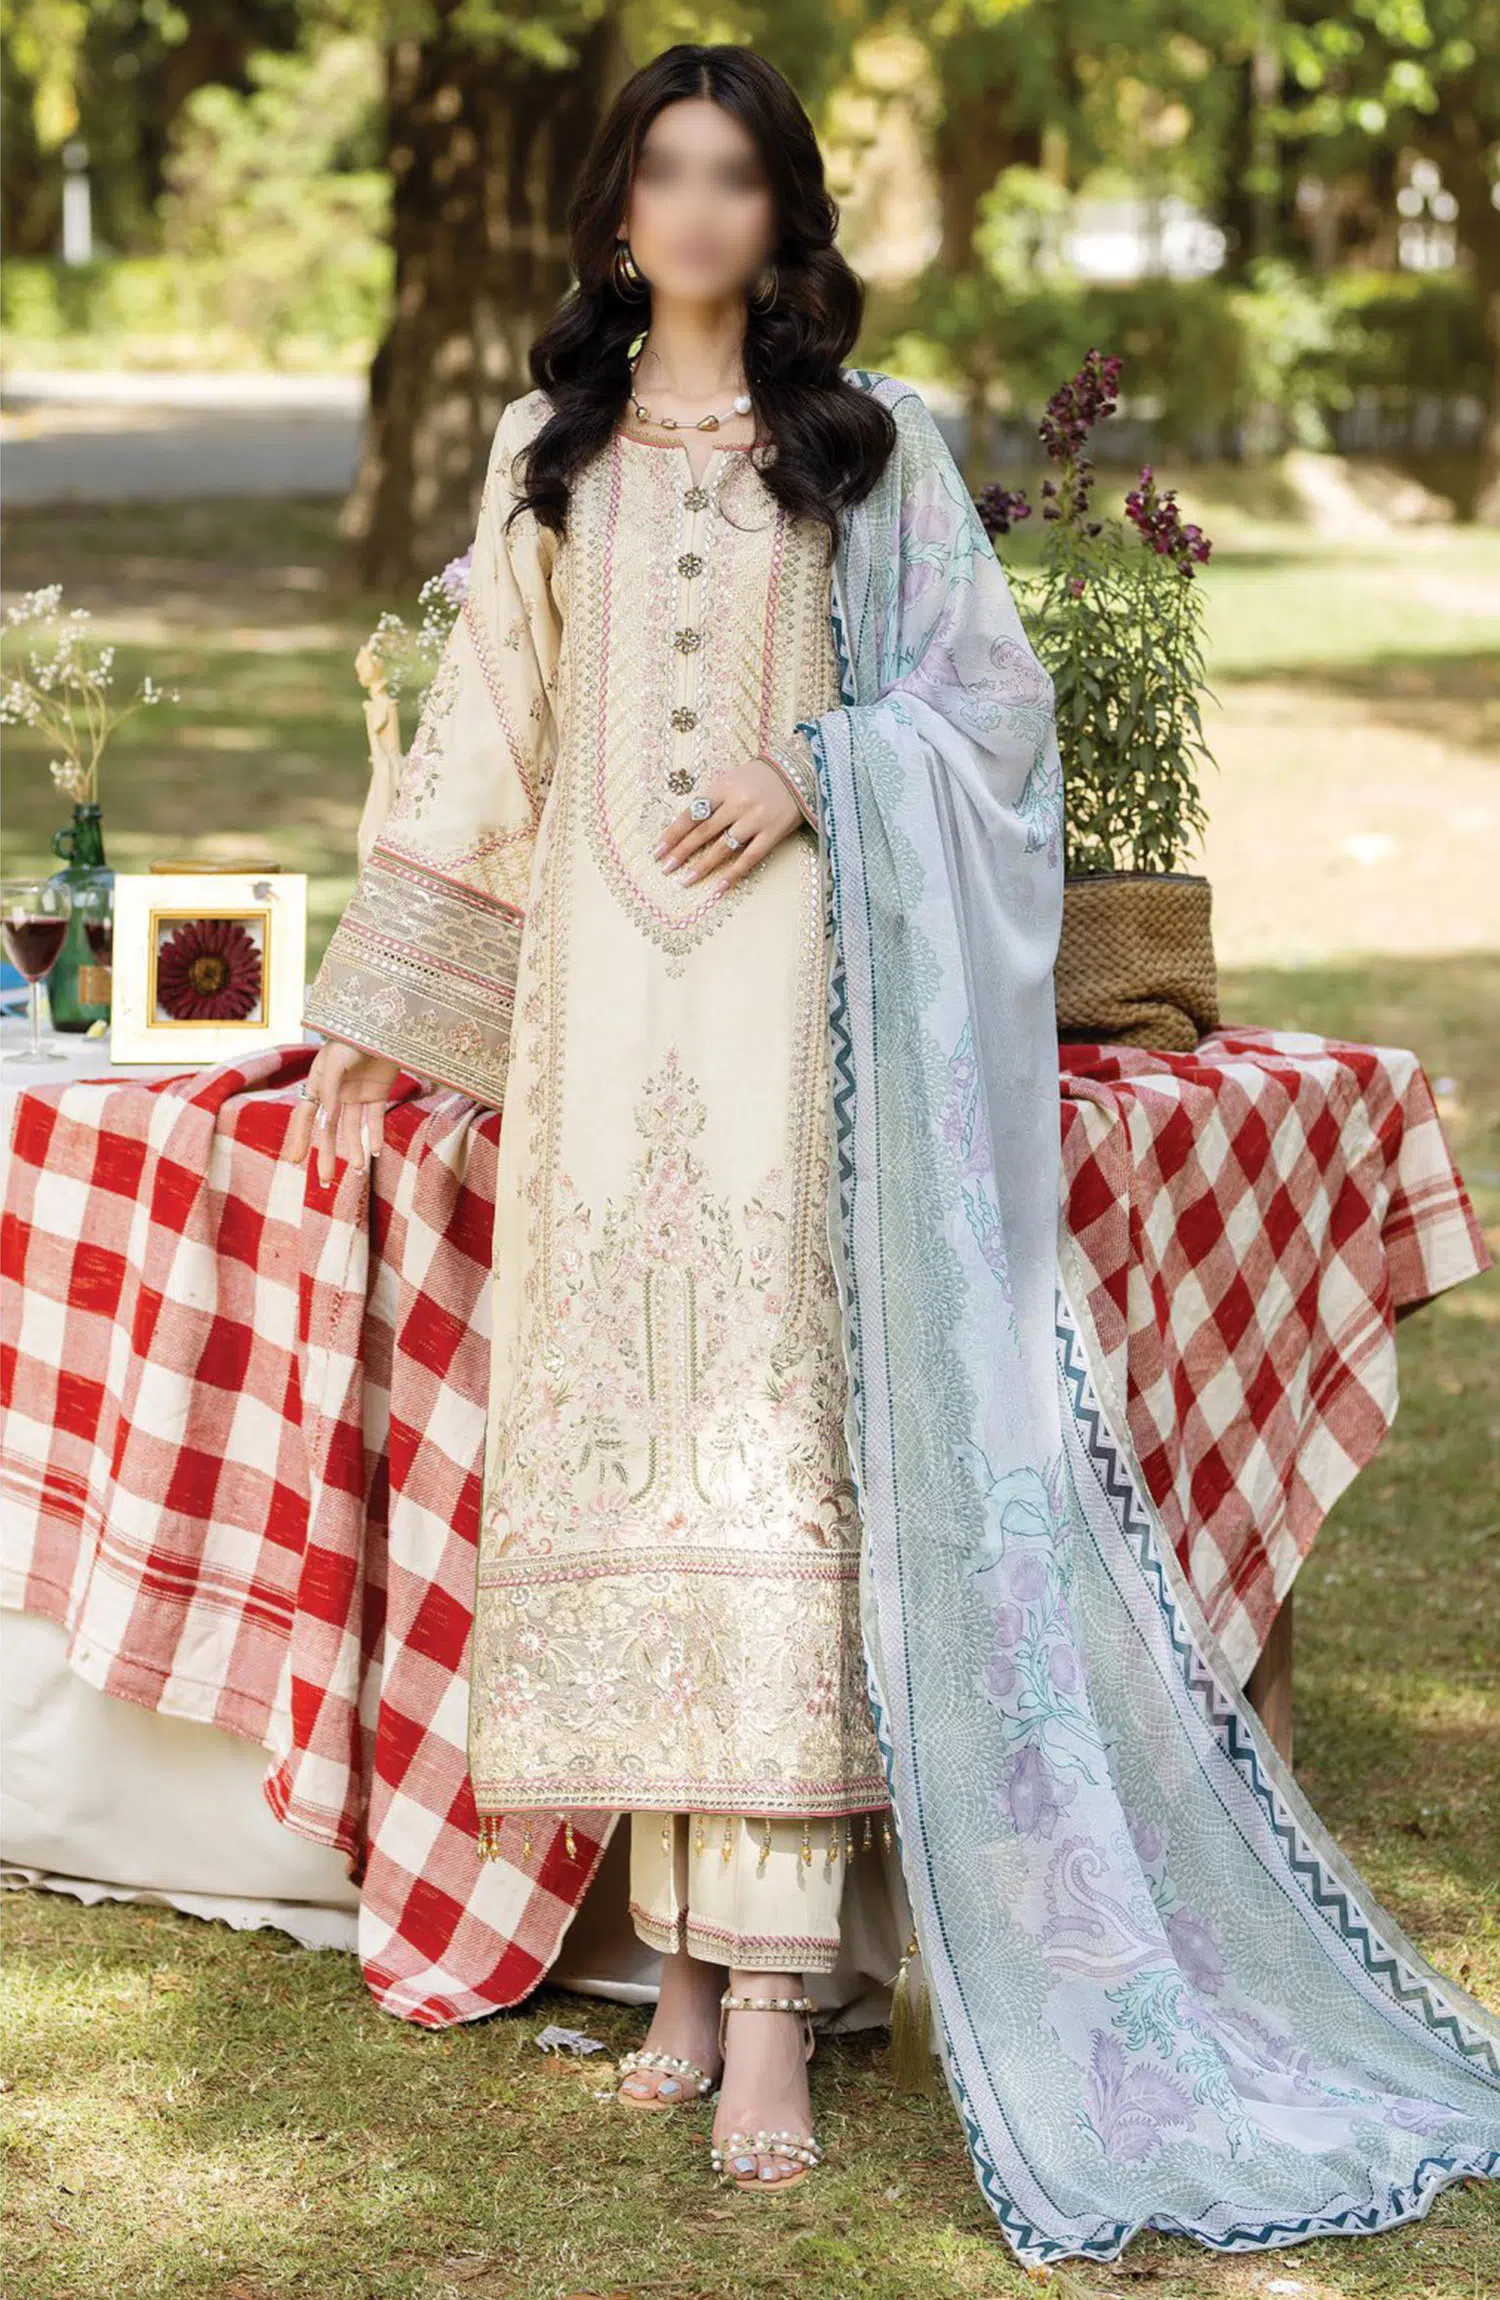 Jaan-E-Adaa Lawn Collection By Imrozia - IPL - 01 MANAN